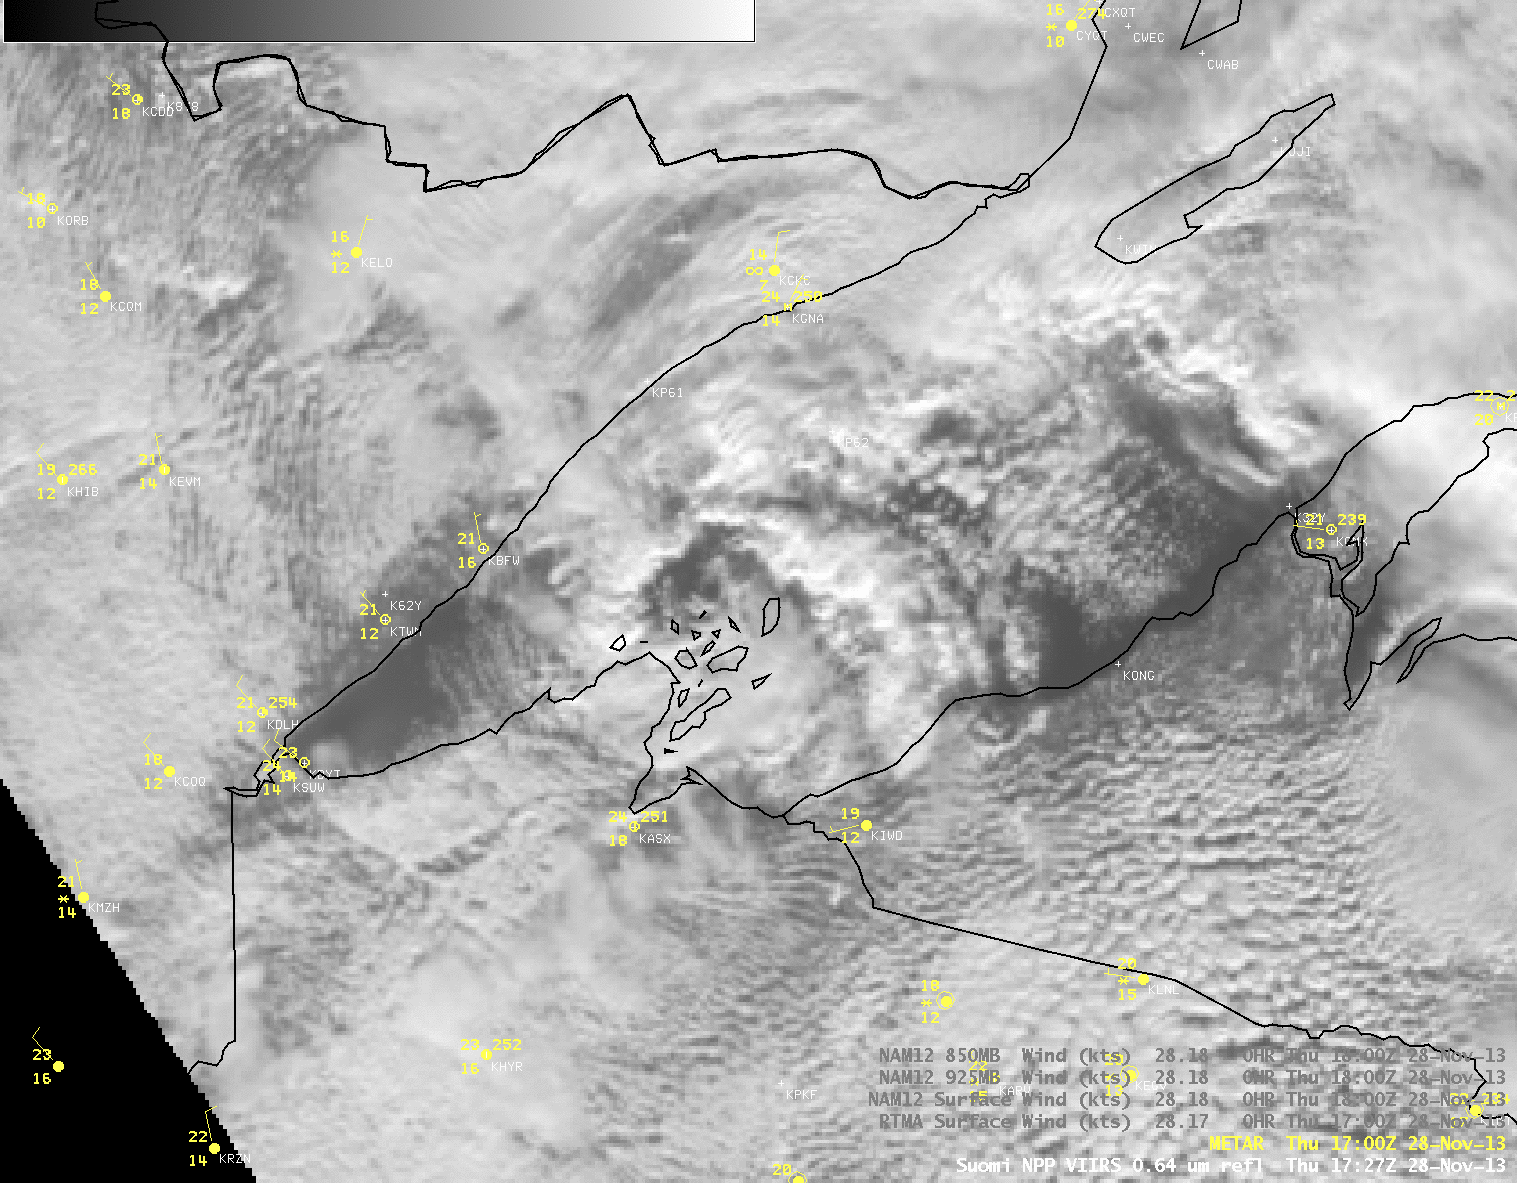 Suomi NPP VIIRS 0.64 Âµm visible channel images (17:27 and 19:07 UTC)